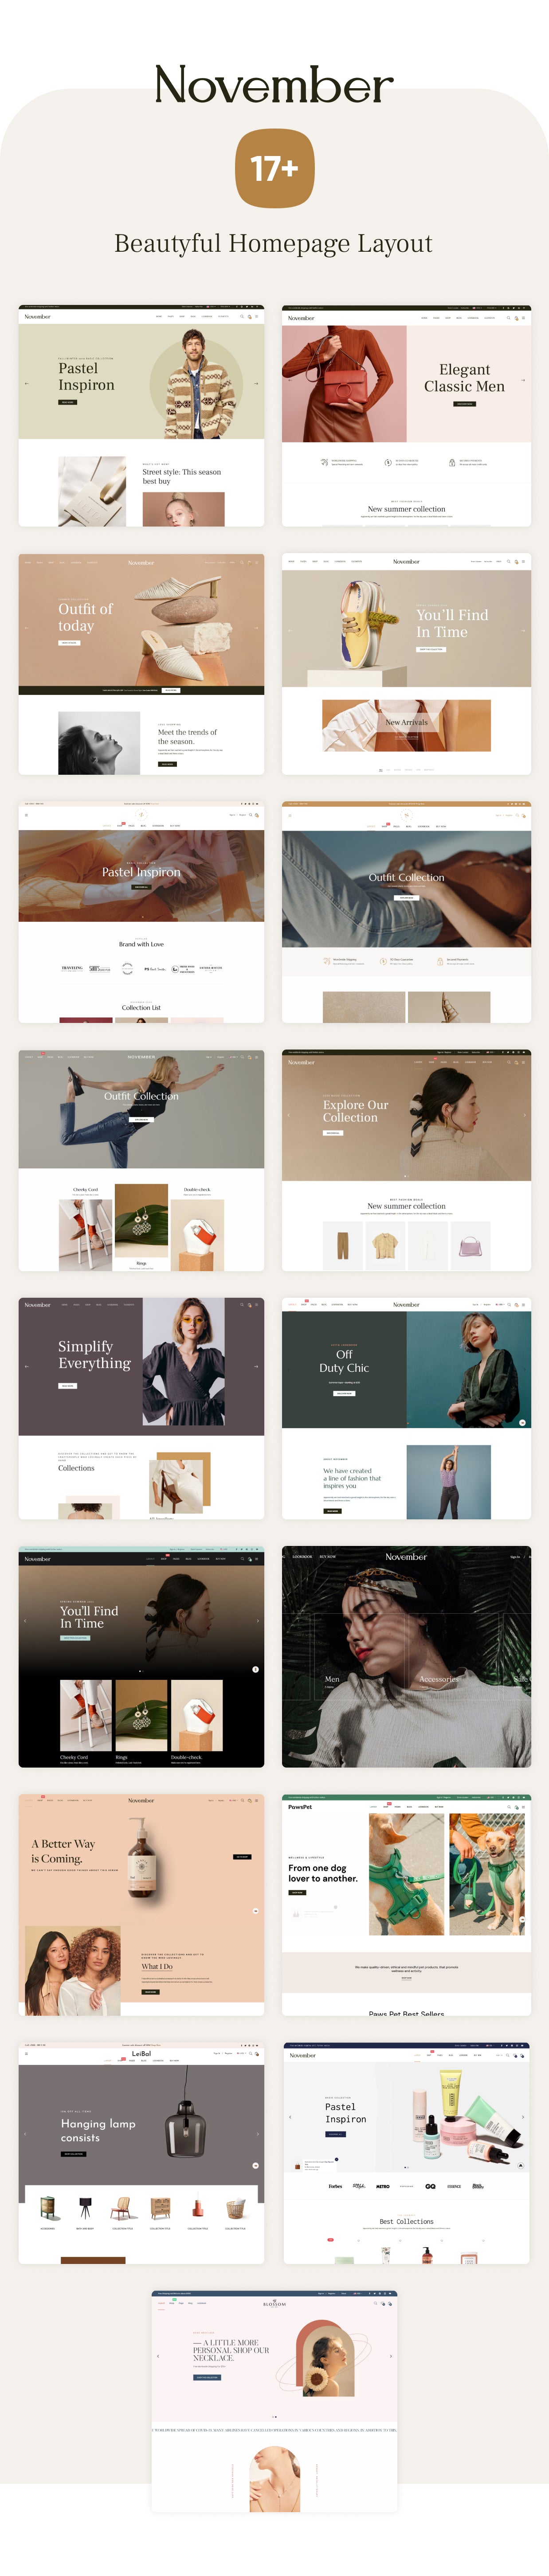 1685011191 188 intro - November - Multipurpose Sections Shopify Theme